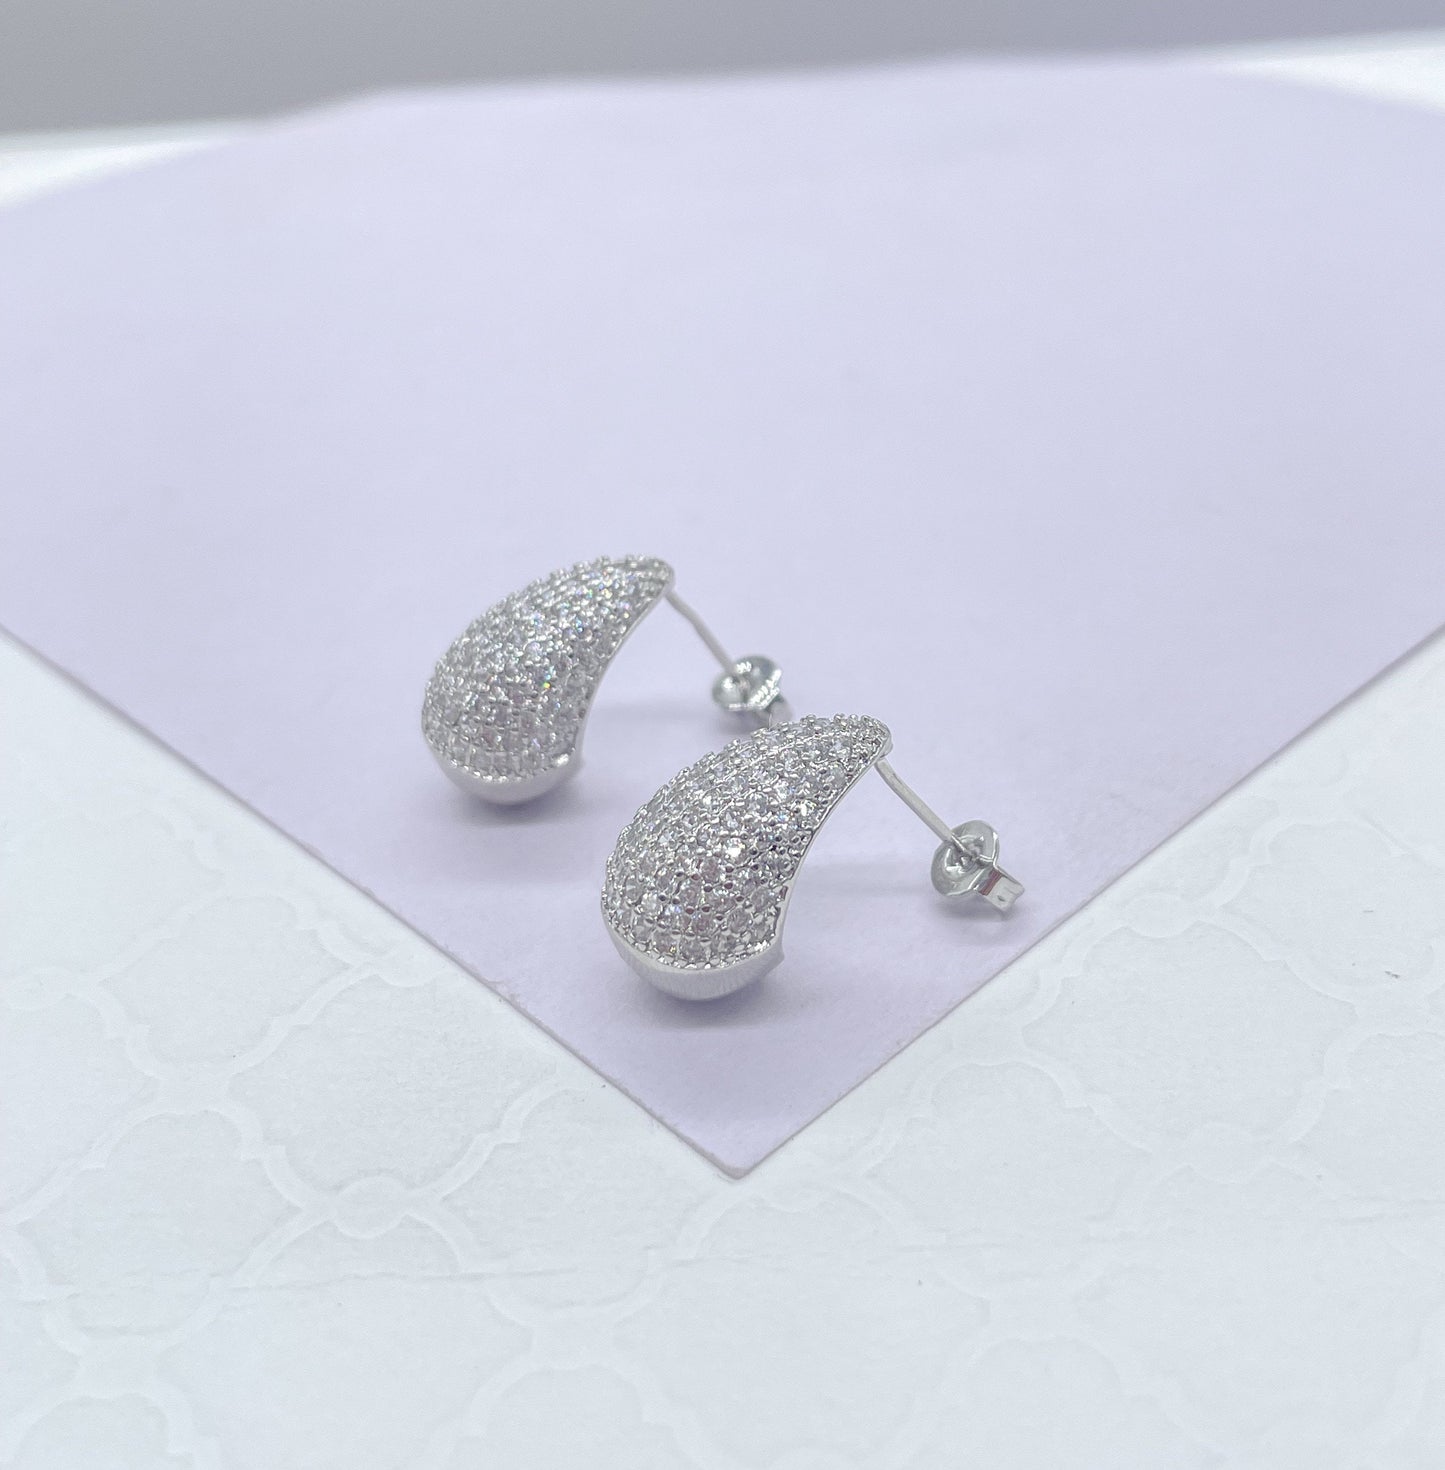 18k Gold Filled Chunky Tear Drop Earring Covered in Pave CZ Stones, Available in 2 sizes